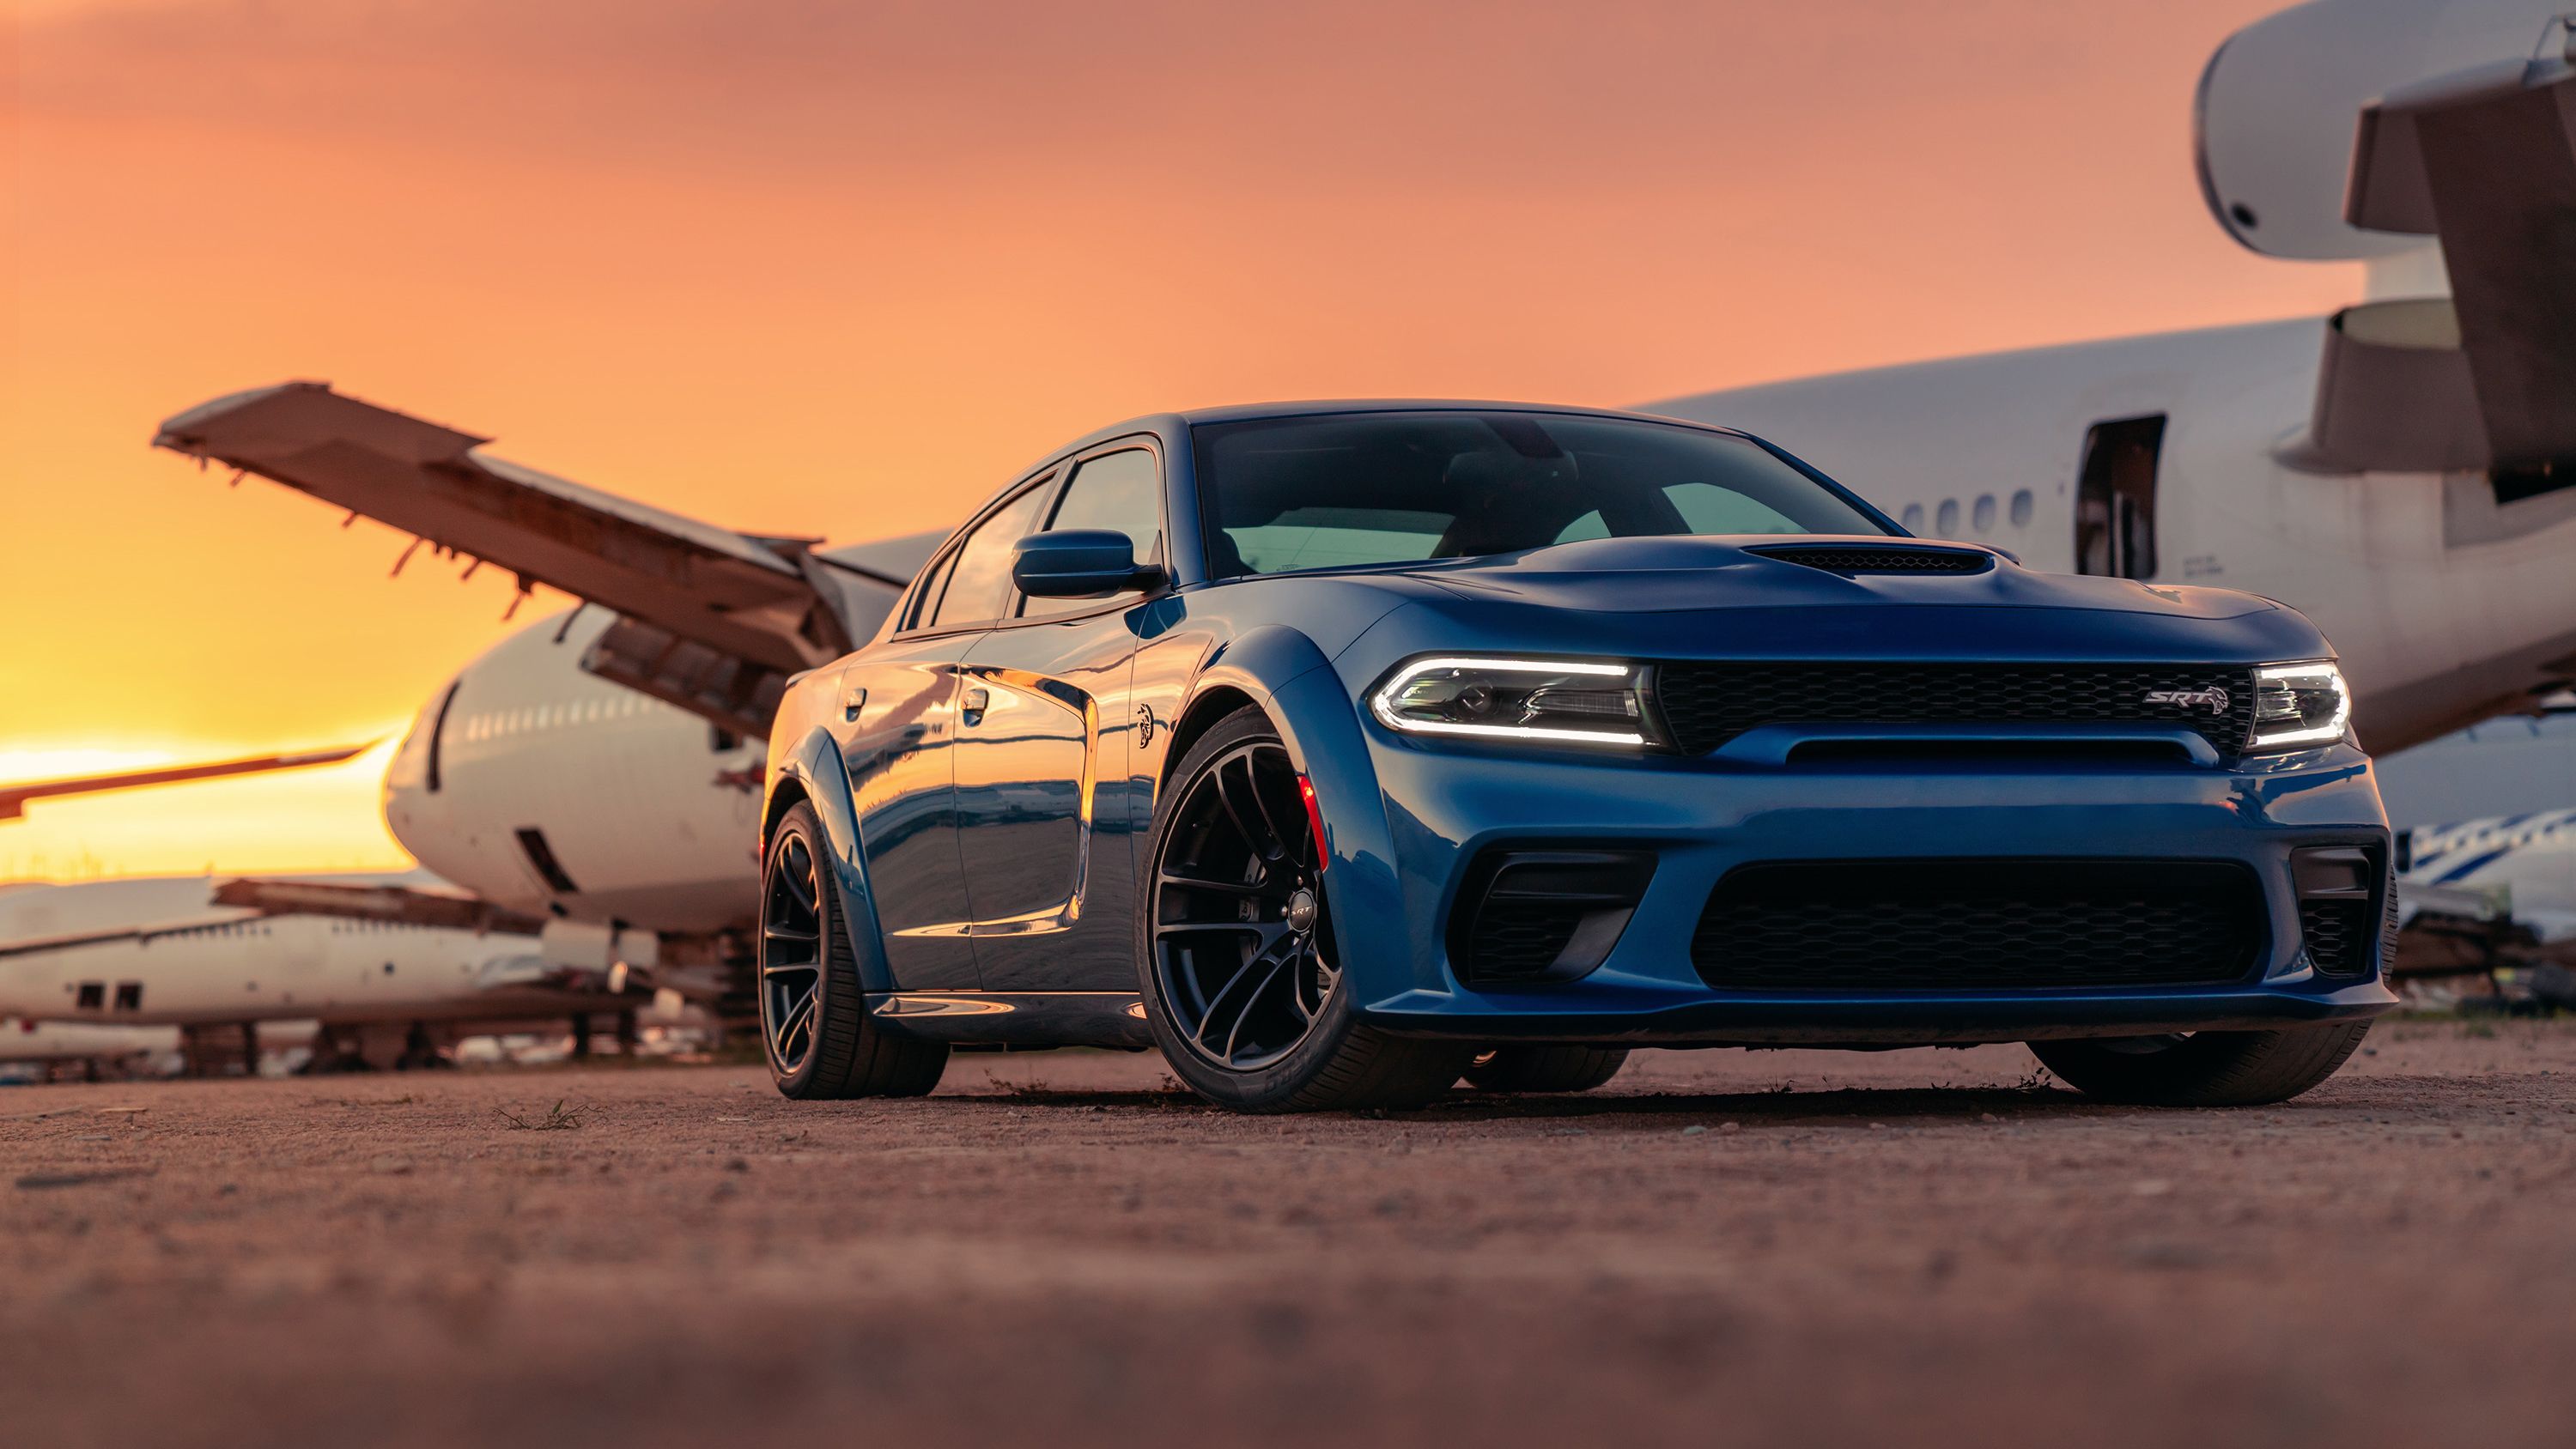 Dodge Charger Wallpapers   Top Free Dodge Charger Backgrounds